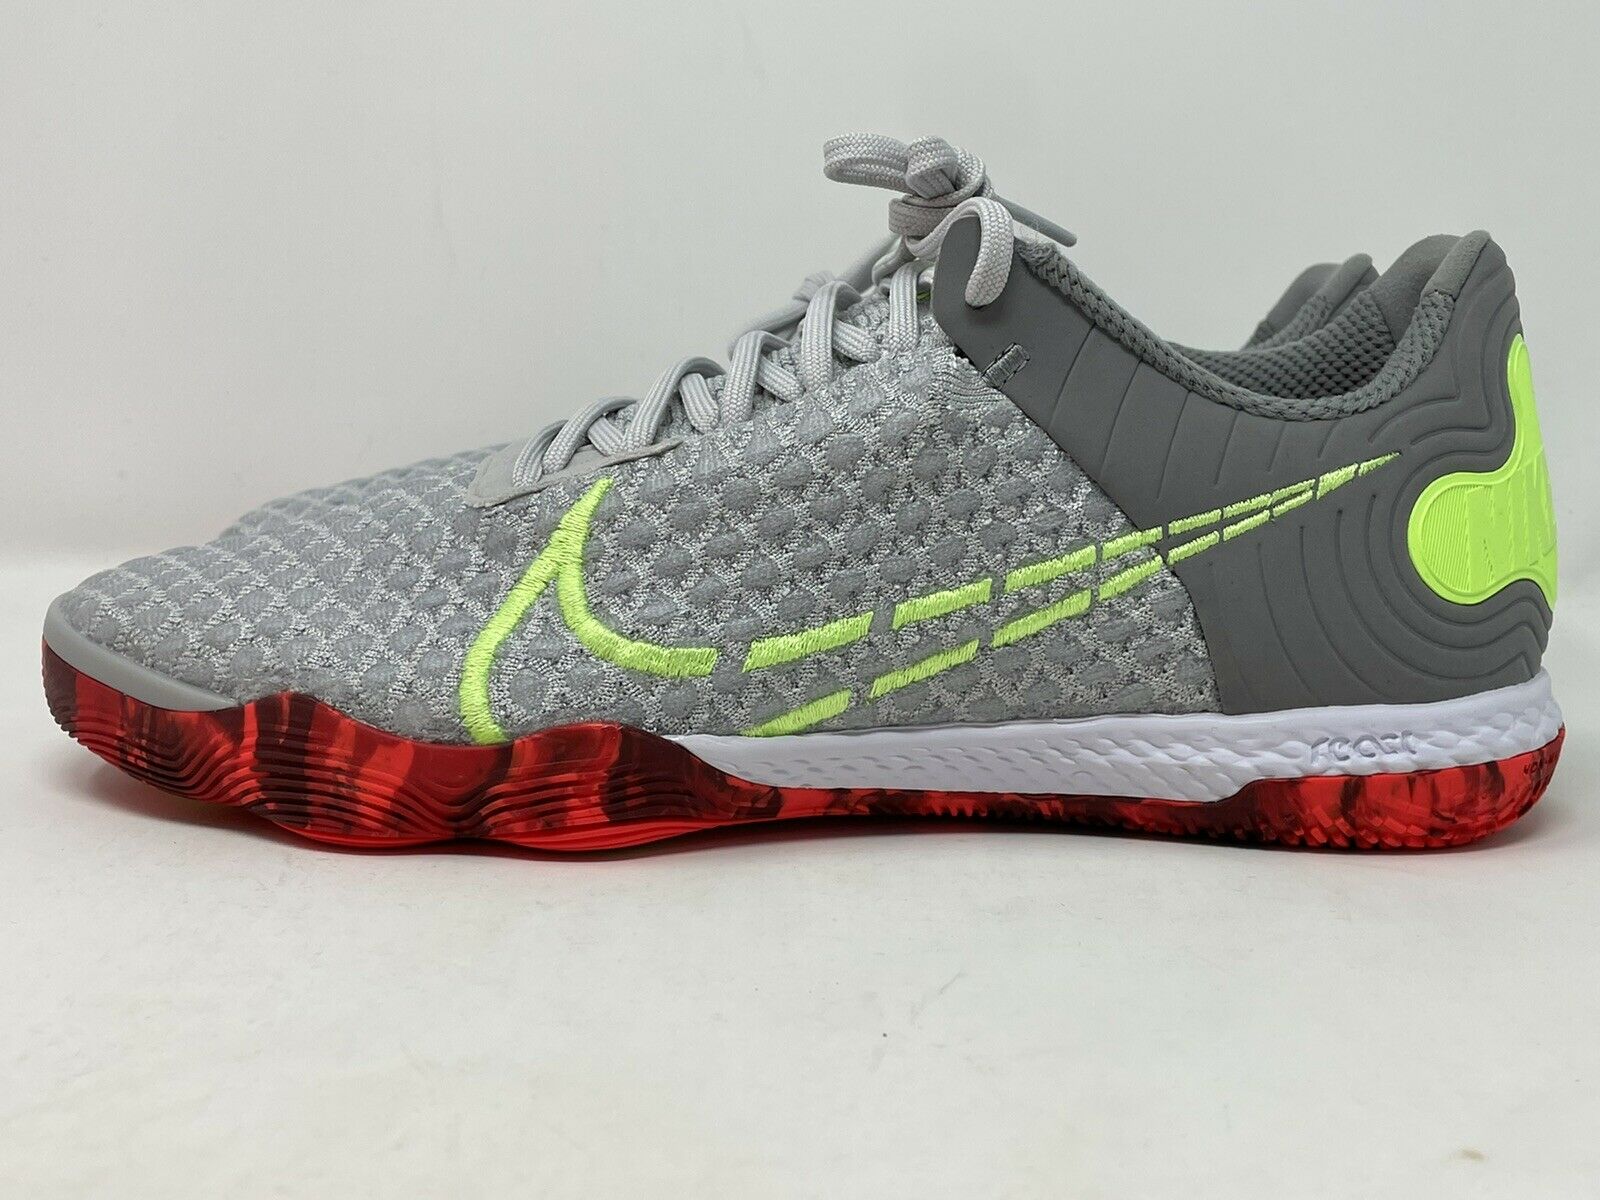 Nike React Gato IC Indoor Soccer Shoes Grey CT0550 006 Men’s Size 8